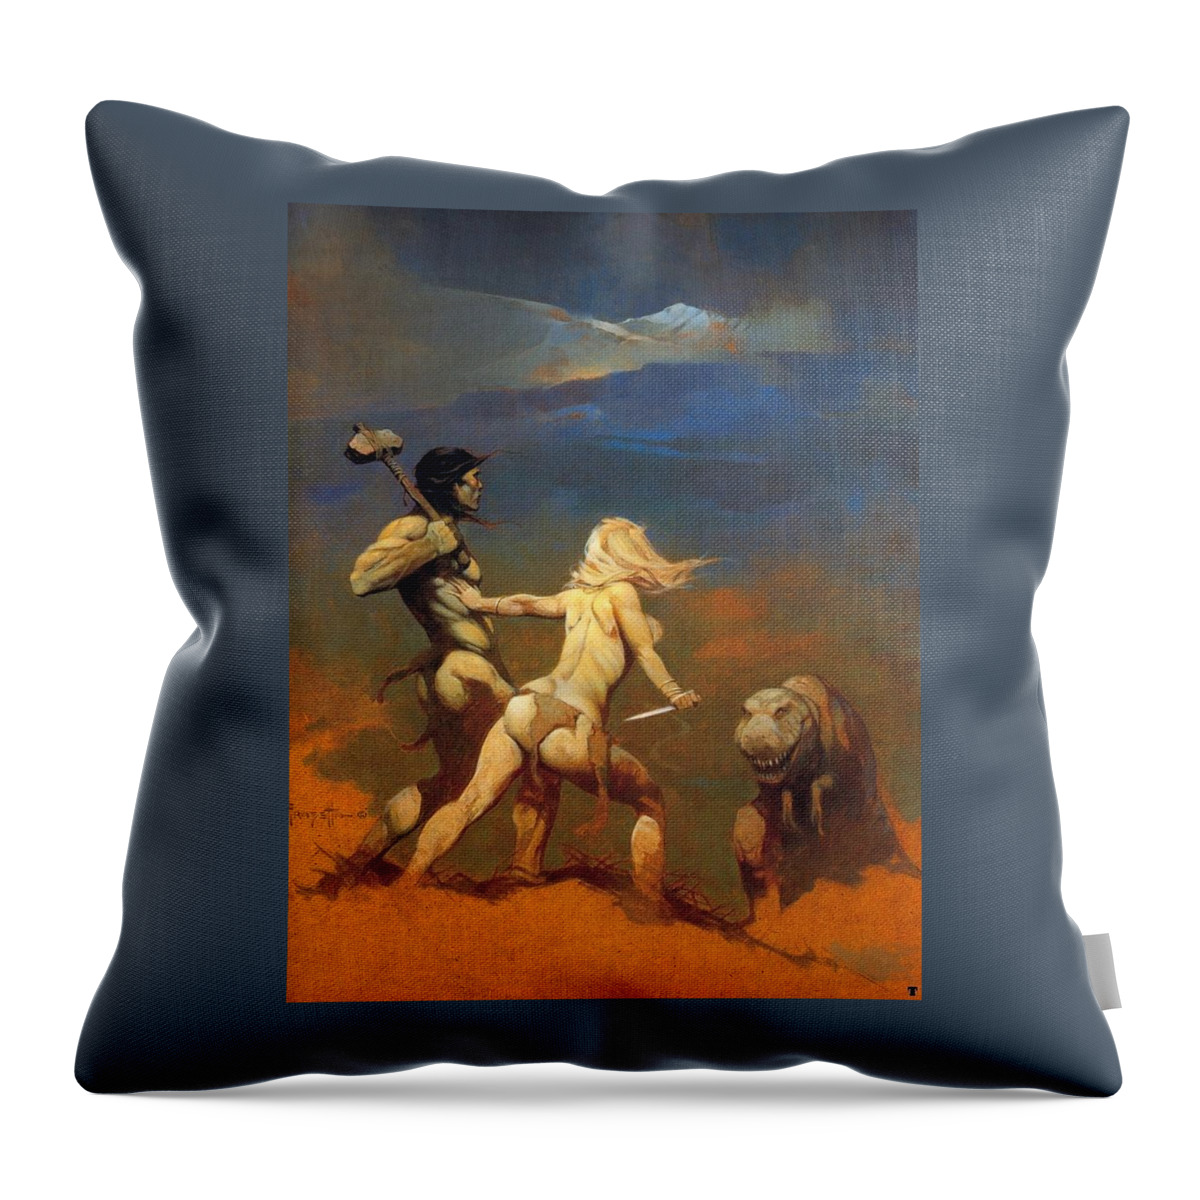  Throw Pillow featuring the photograph Twoper by Two